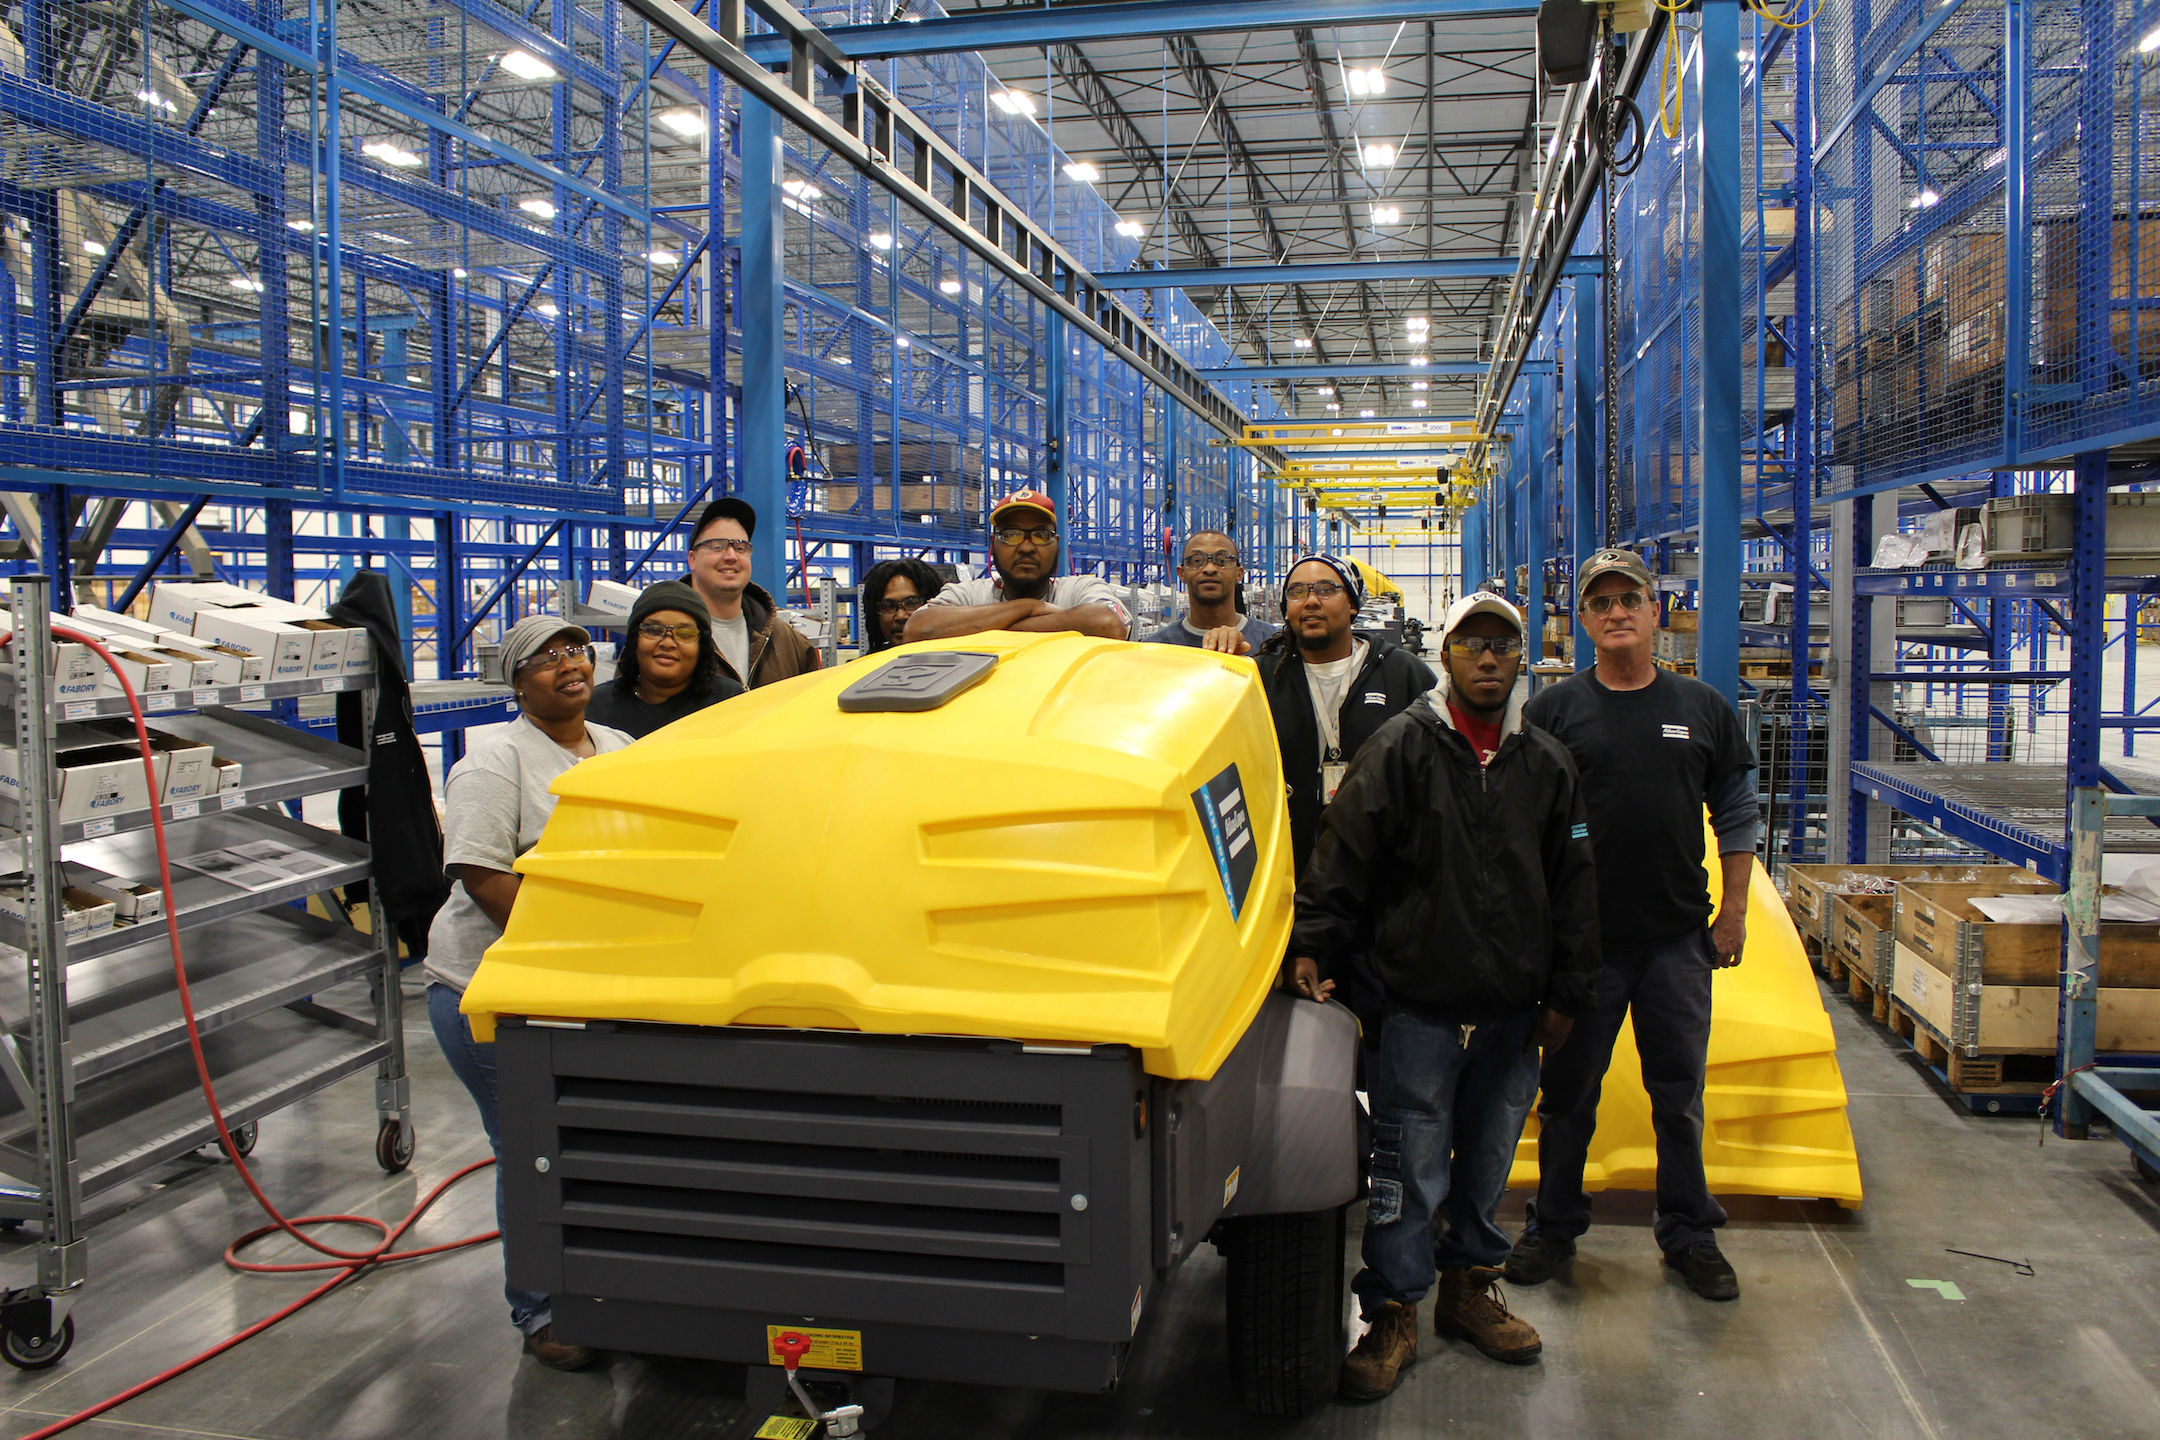 Atlas Copco has produced its first piece of equipment, an XAS 185 portable air compressor, at its new production facility in Rock Hill, South Carolina.